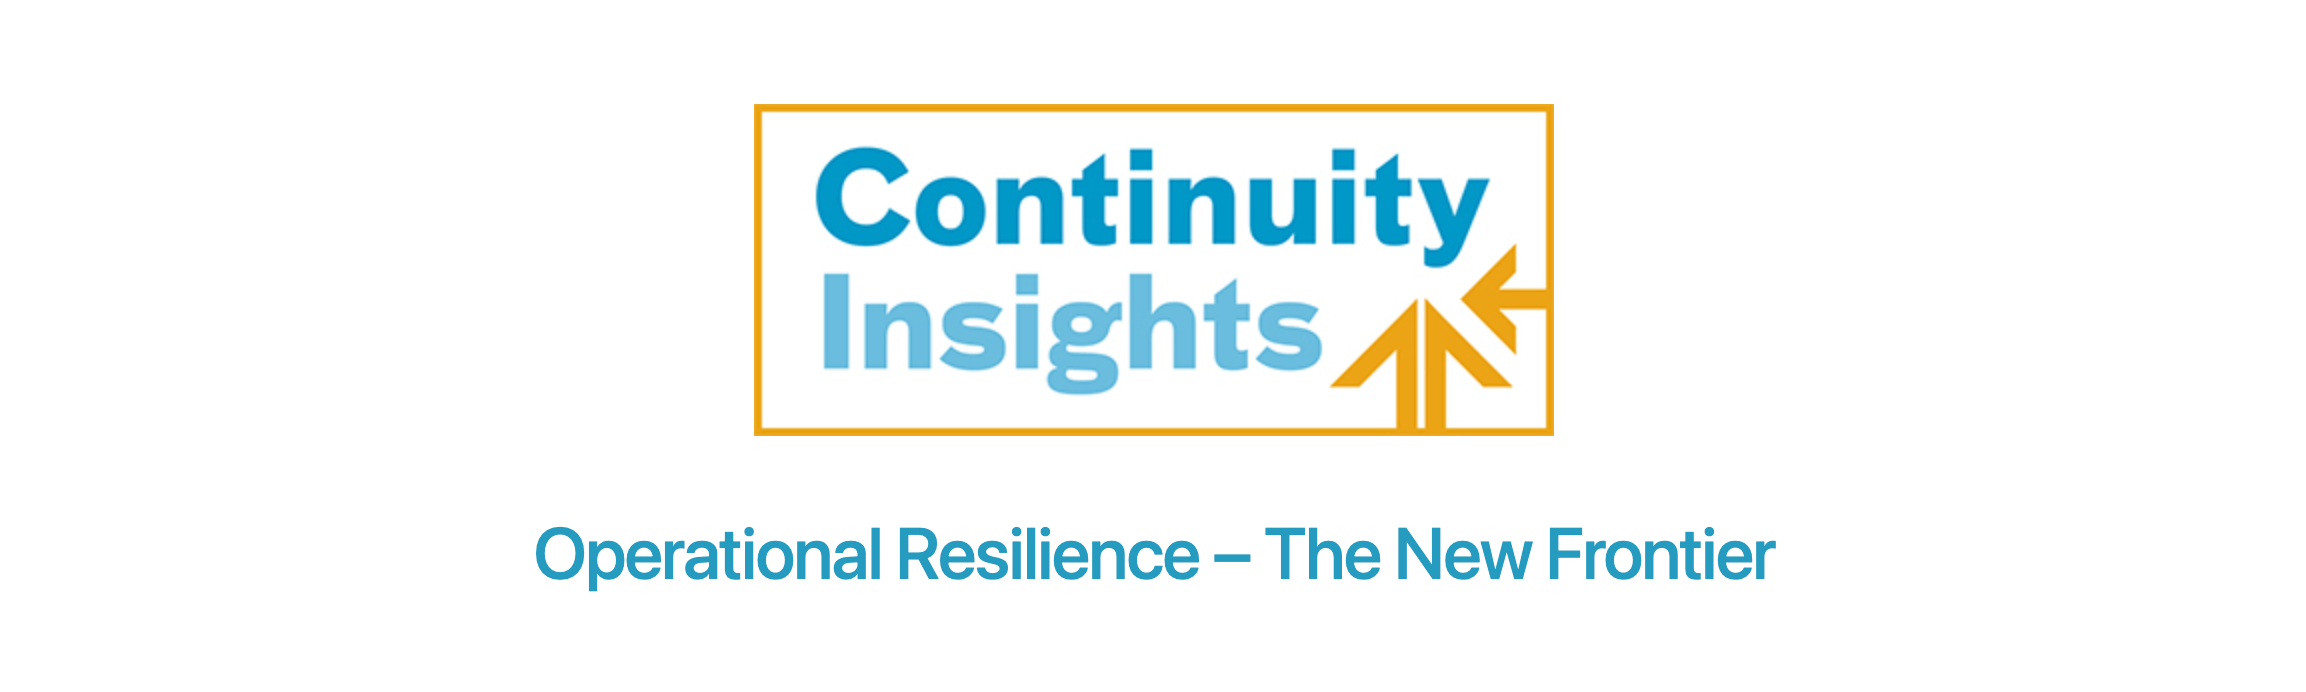 Continuity Insights Operational Resilience - The New Frontier